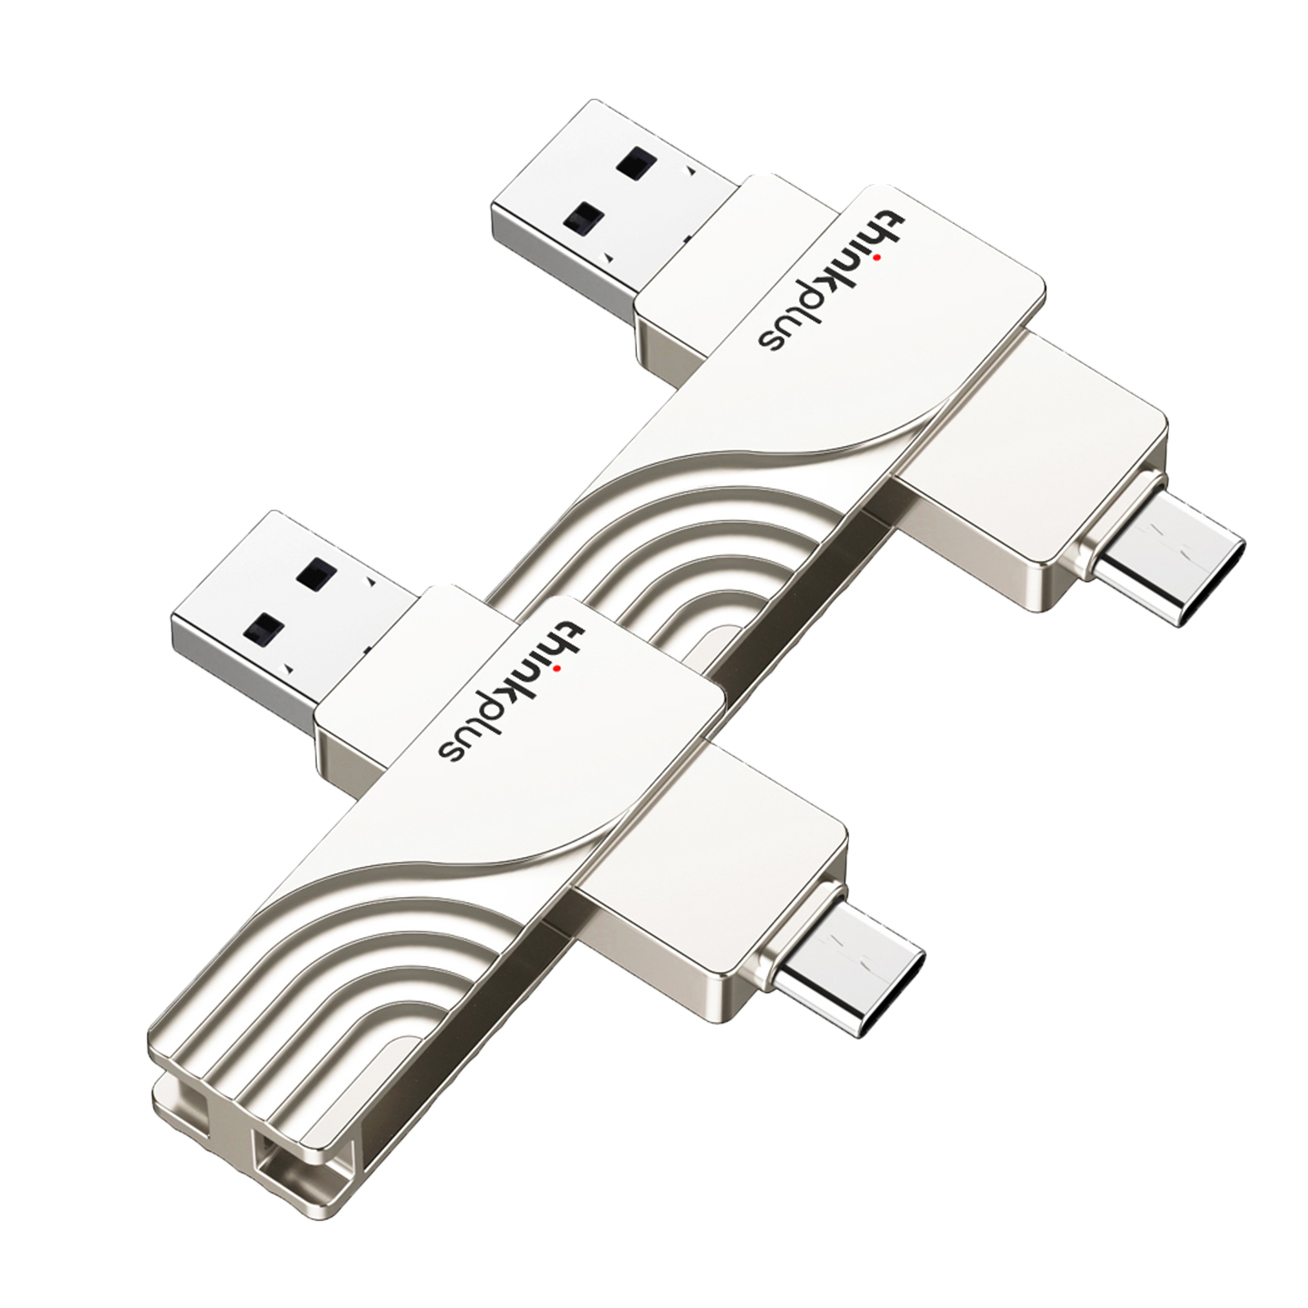 Find 2 Pcs Lenovo ThinkPlus TPCU301 2 In 1 Type C USB3 0 Flash Drive 128G 360 Rotation Zinc Alloy USB Disk Portable Thumb Drive for Computer Phone for Sale on Gipsybee.com with cryptocurrencies